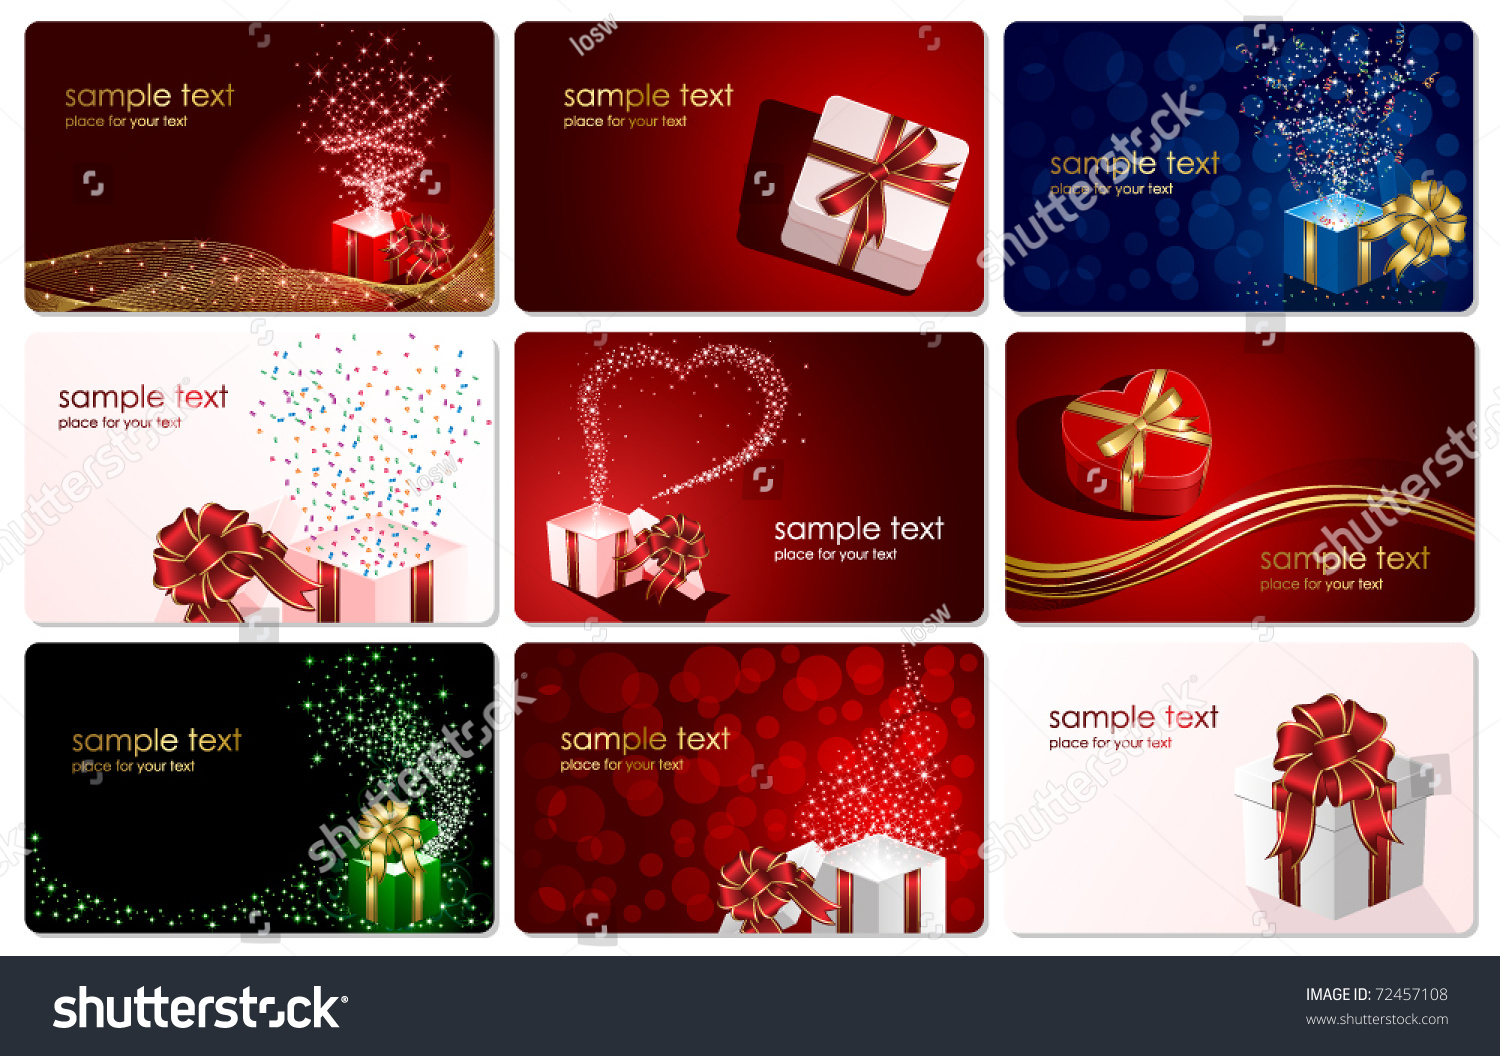 Set Of Cards With Presents, Illustration - 72457108 : Shutterstock